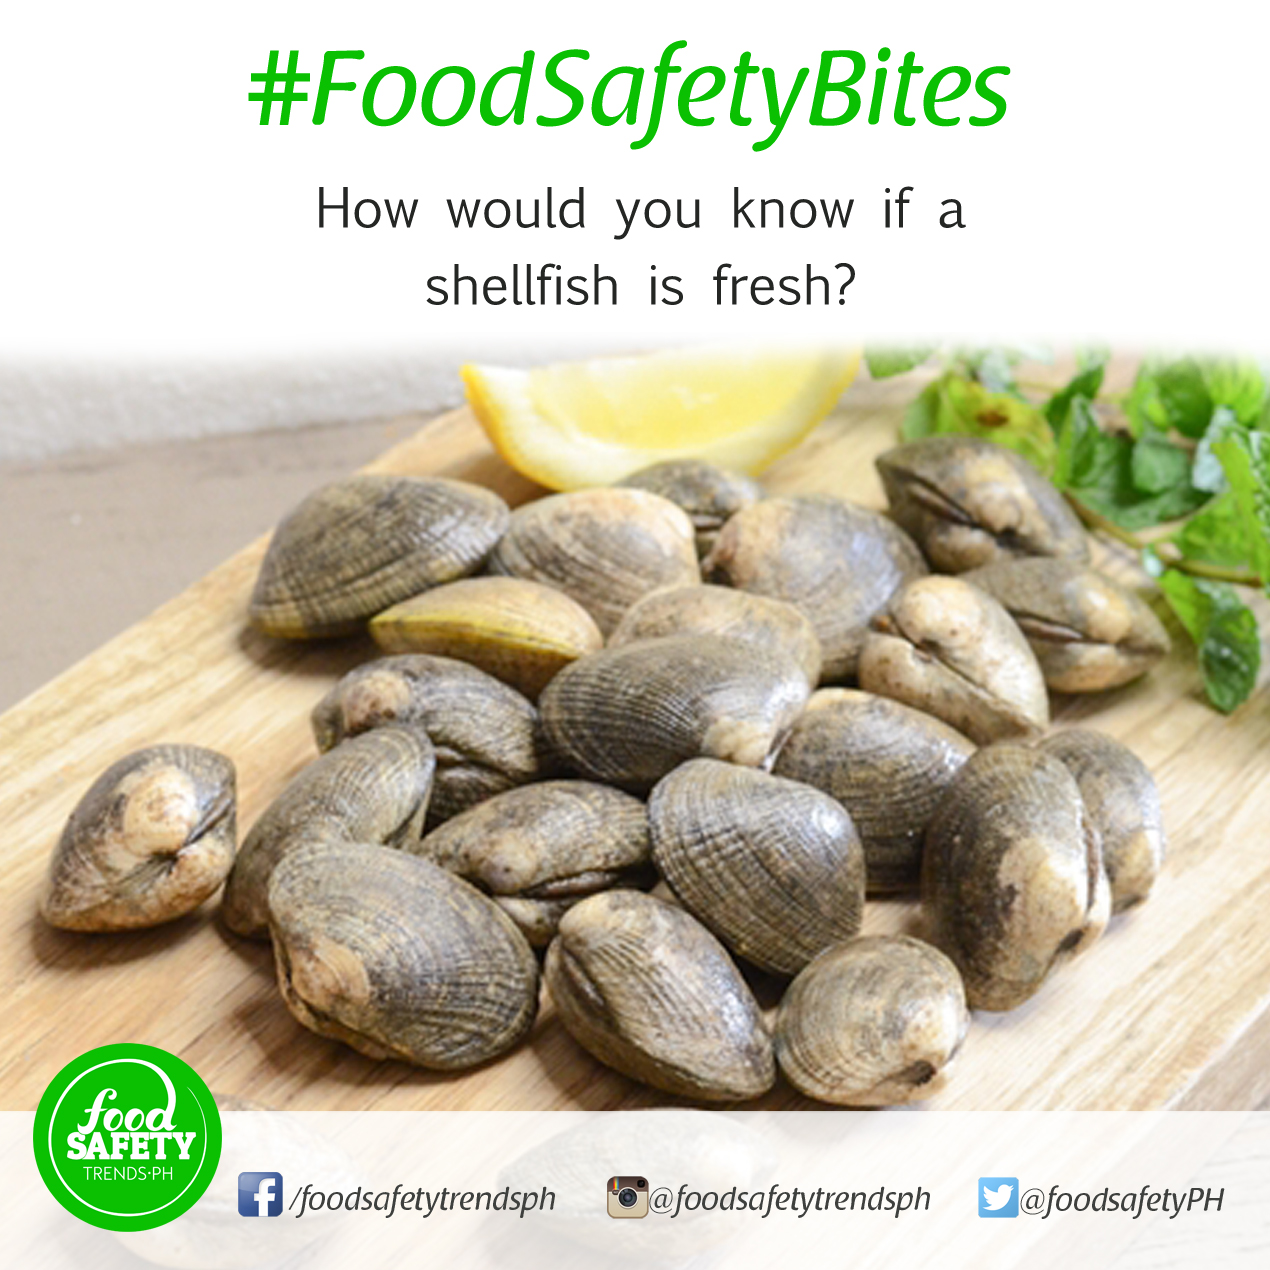 How would you know if a shellfish is fresh?